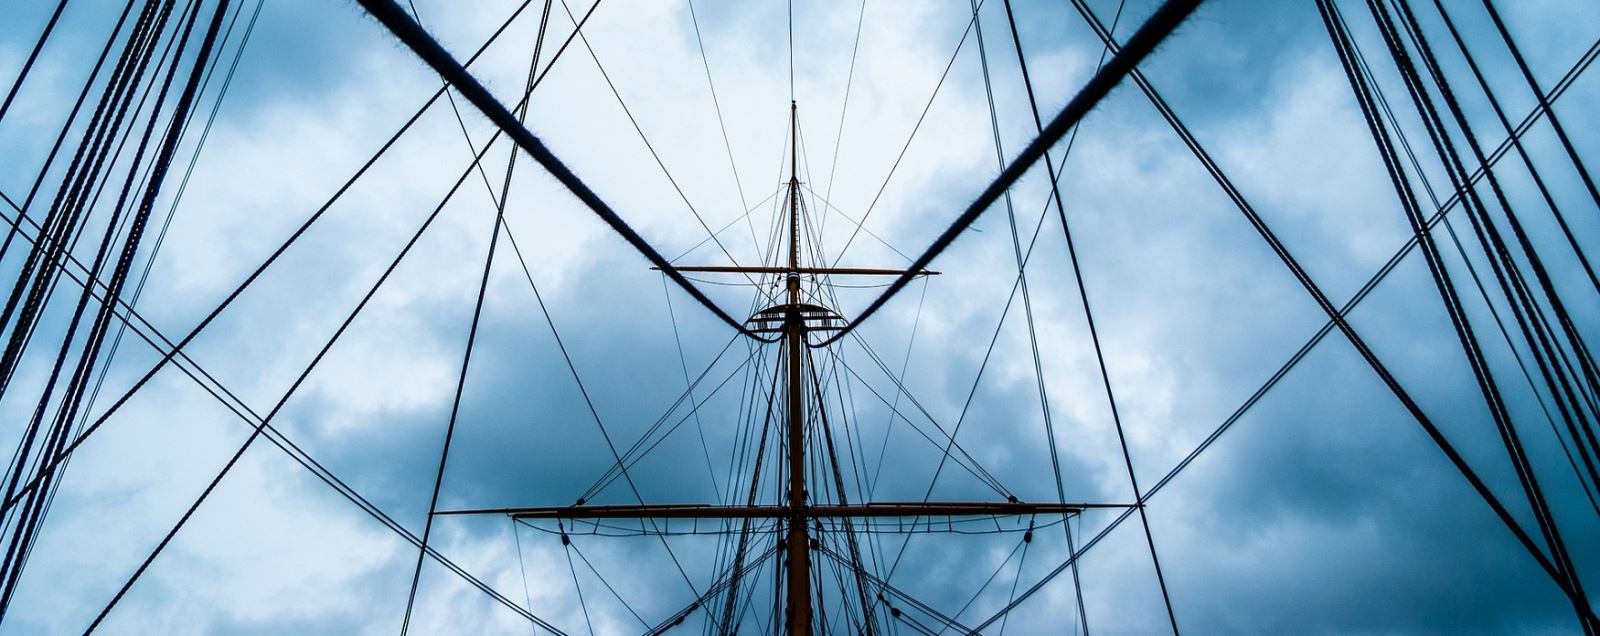 Image of boat masts from Portsmouth Historic Dockyard